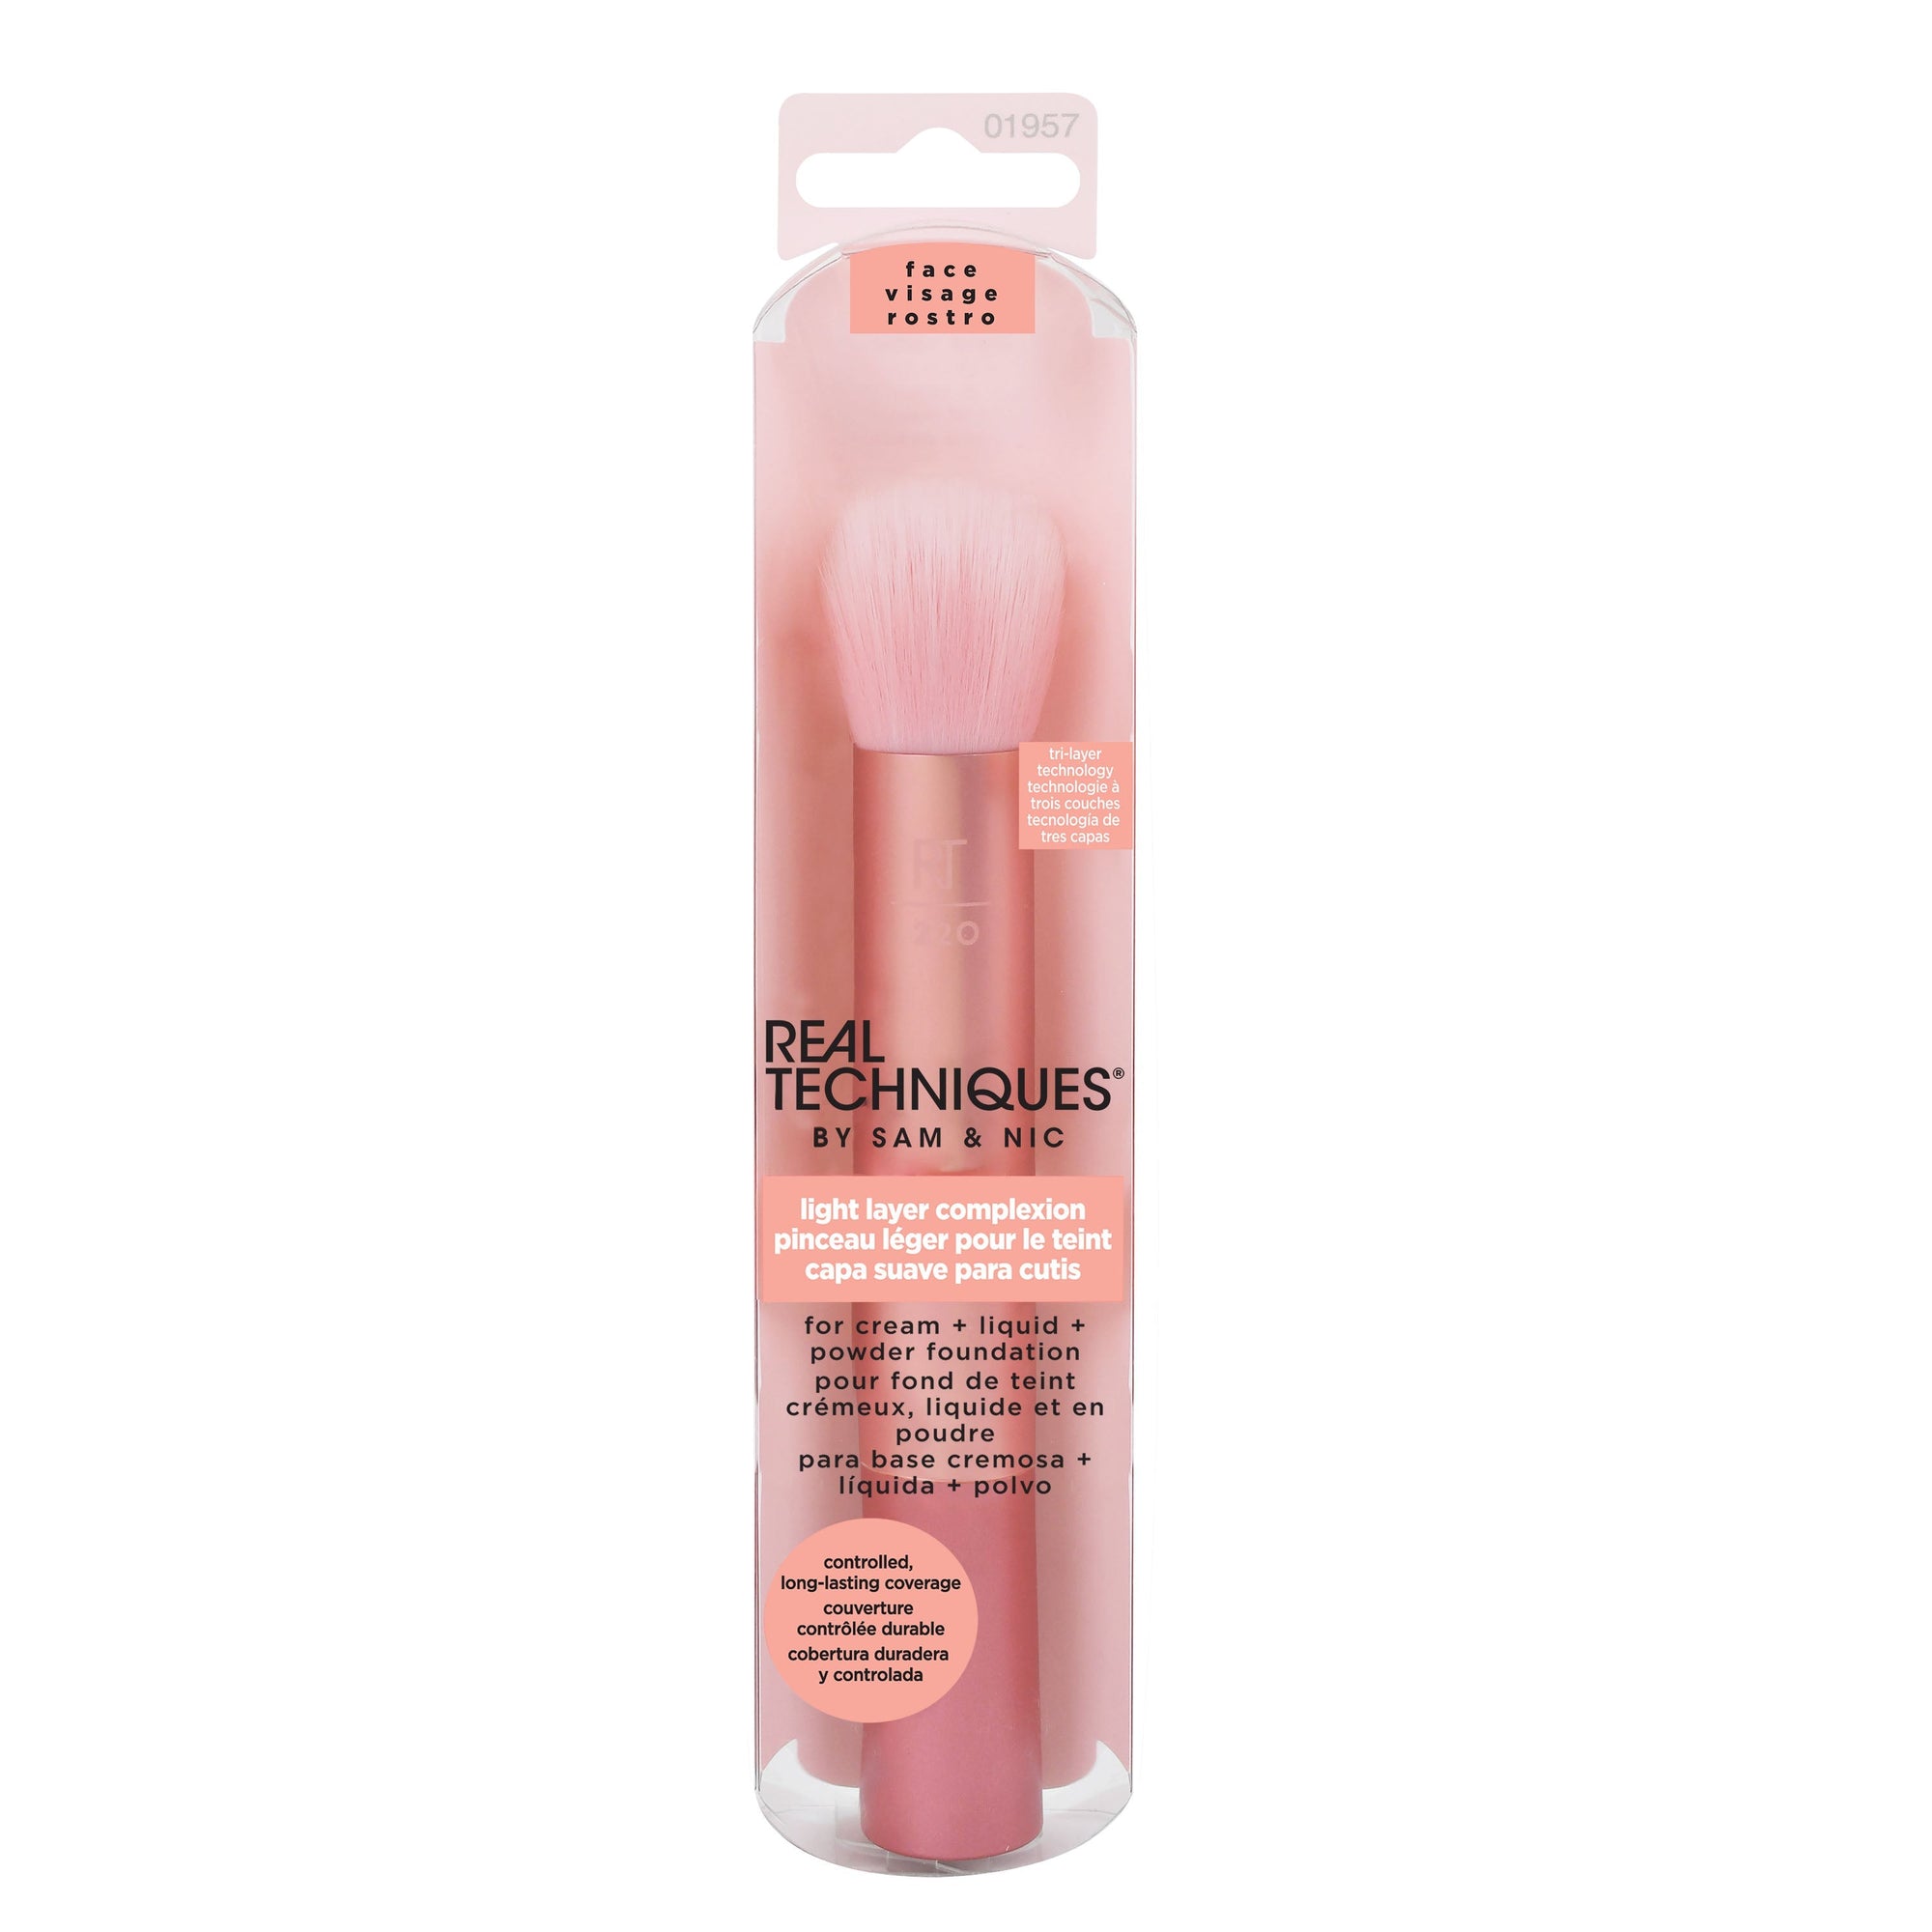 Real Techniques Light Layer Complexion brush